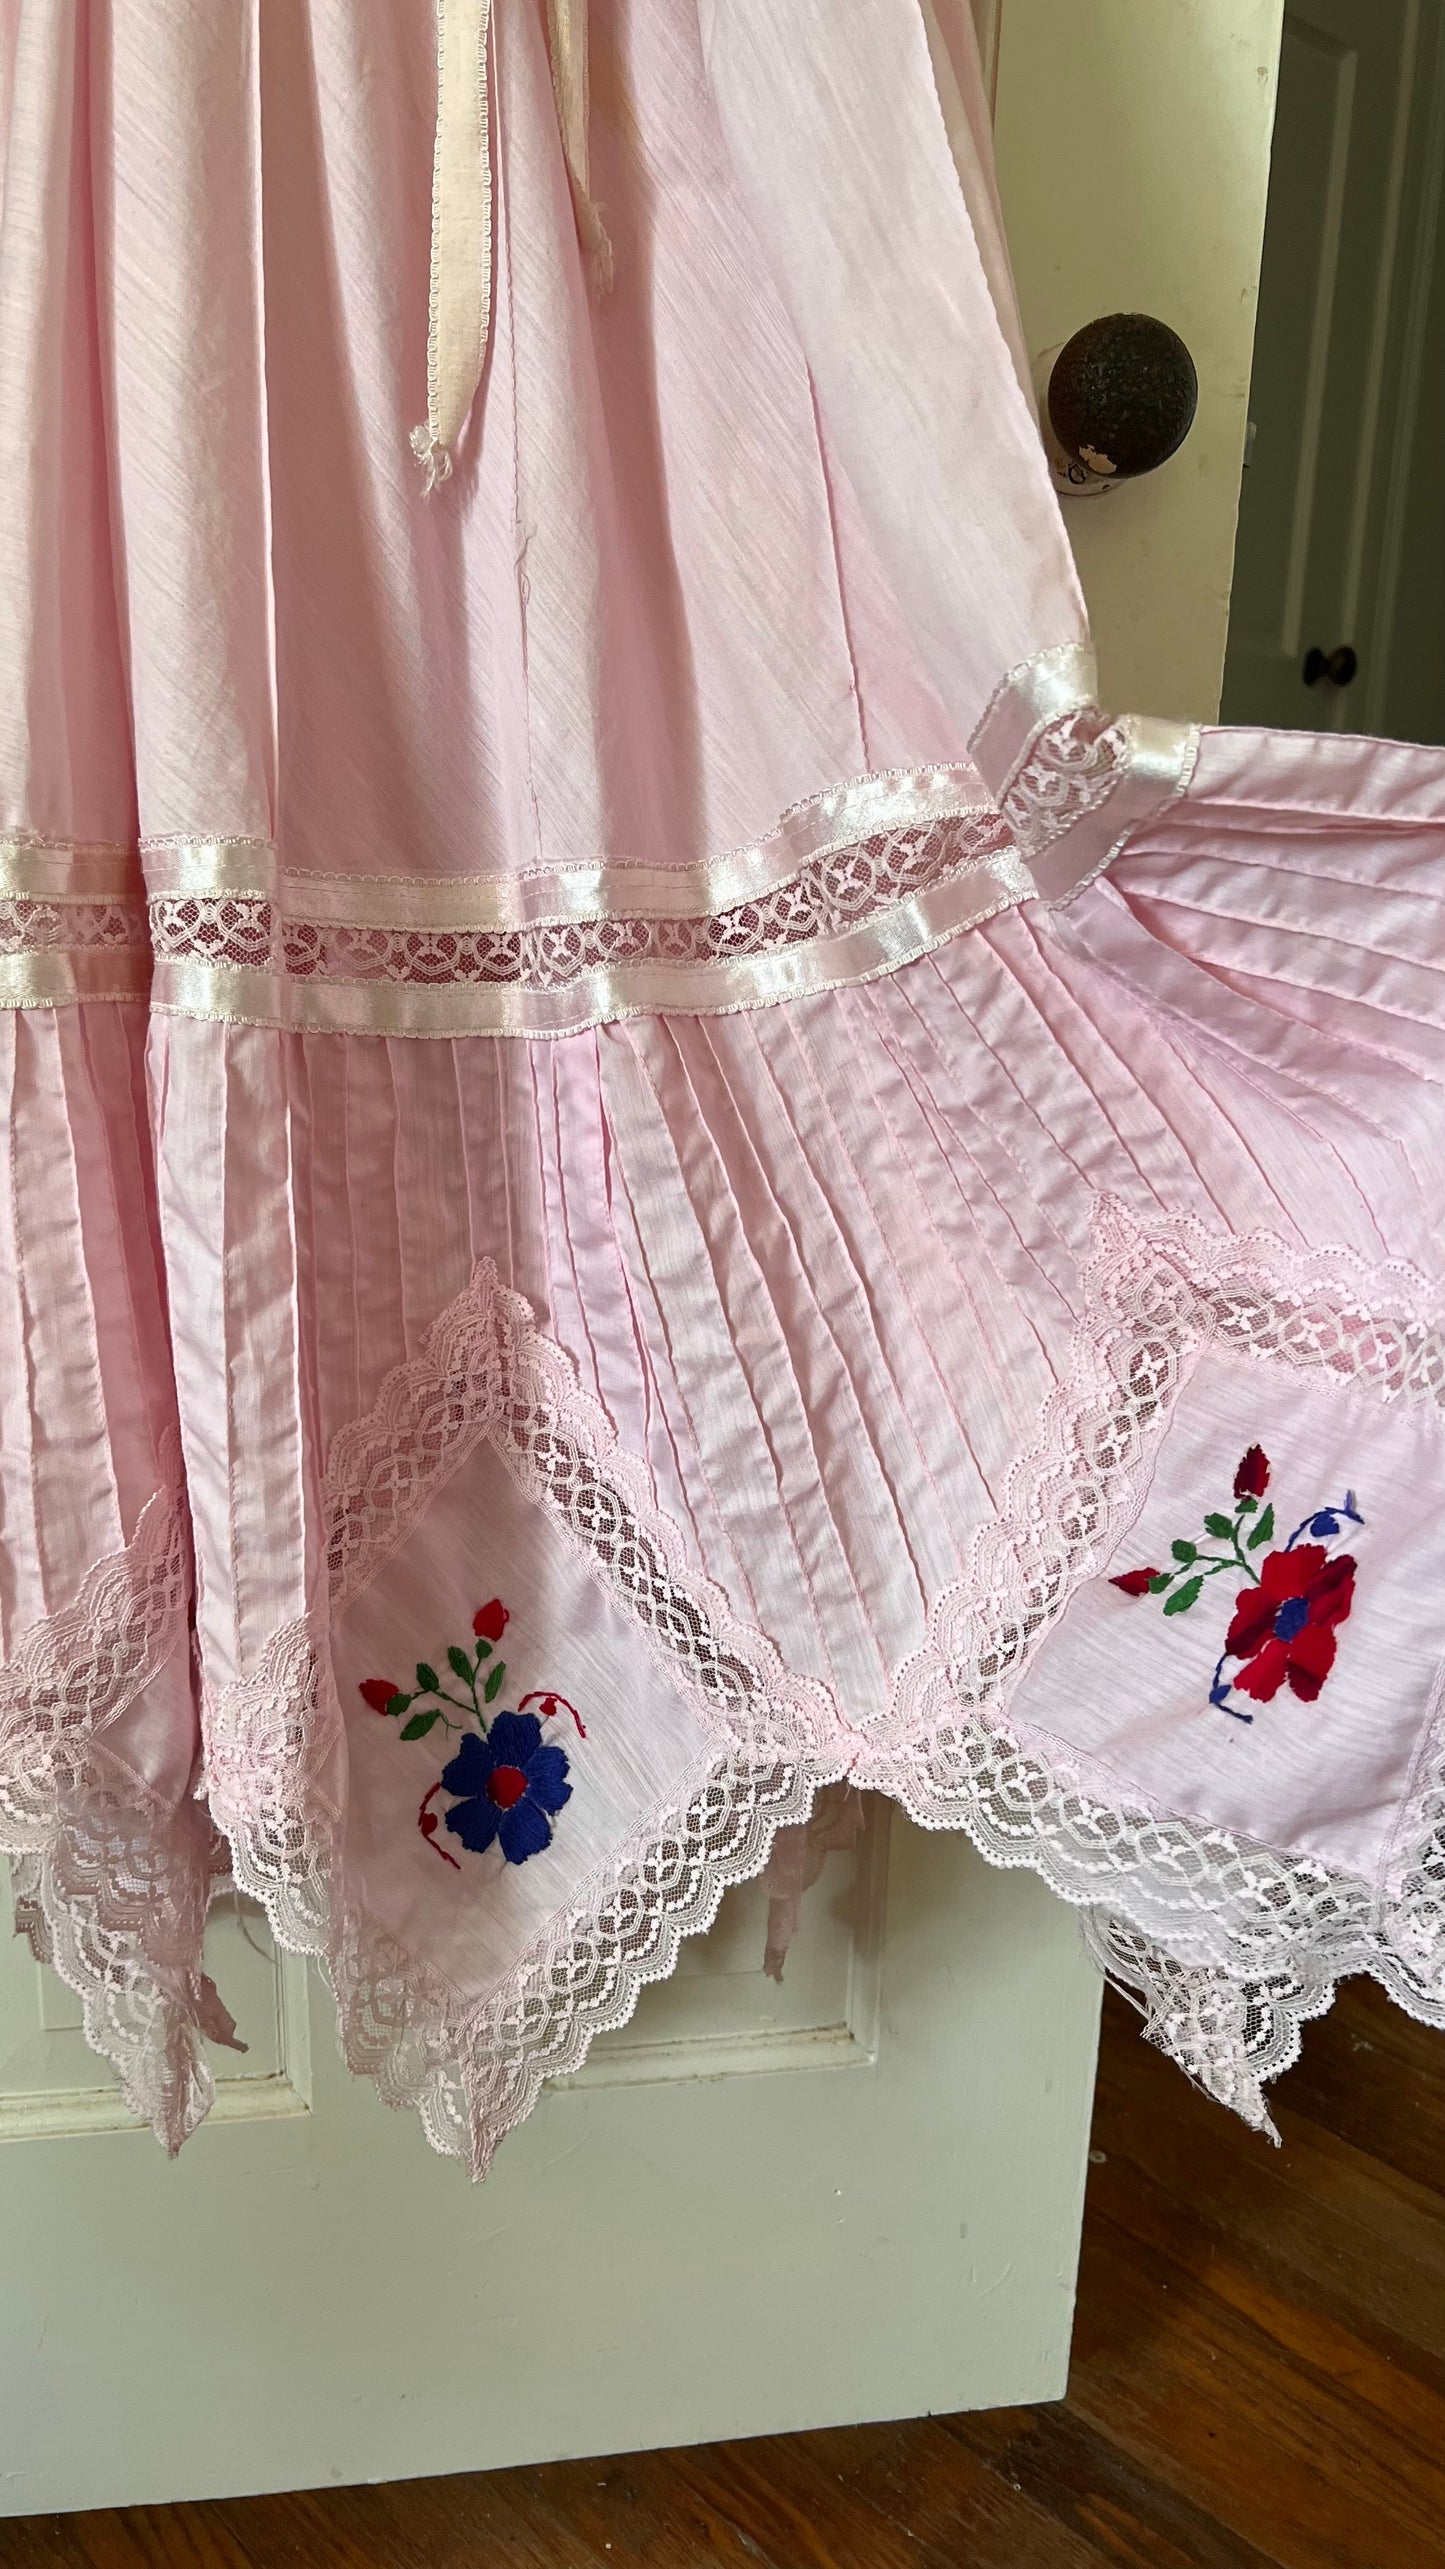 1970s Baby Pink Embroidered Mexican Dress (XL)